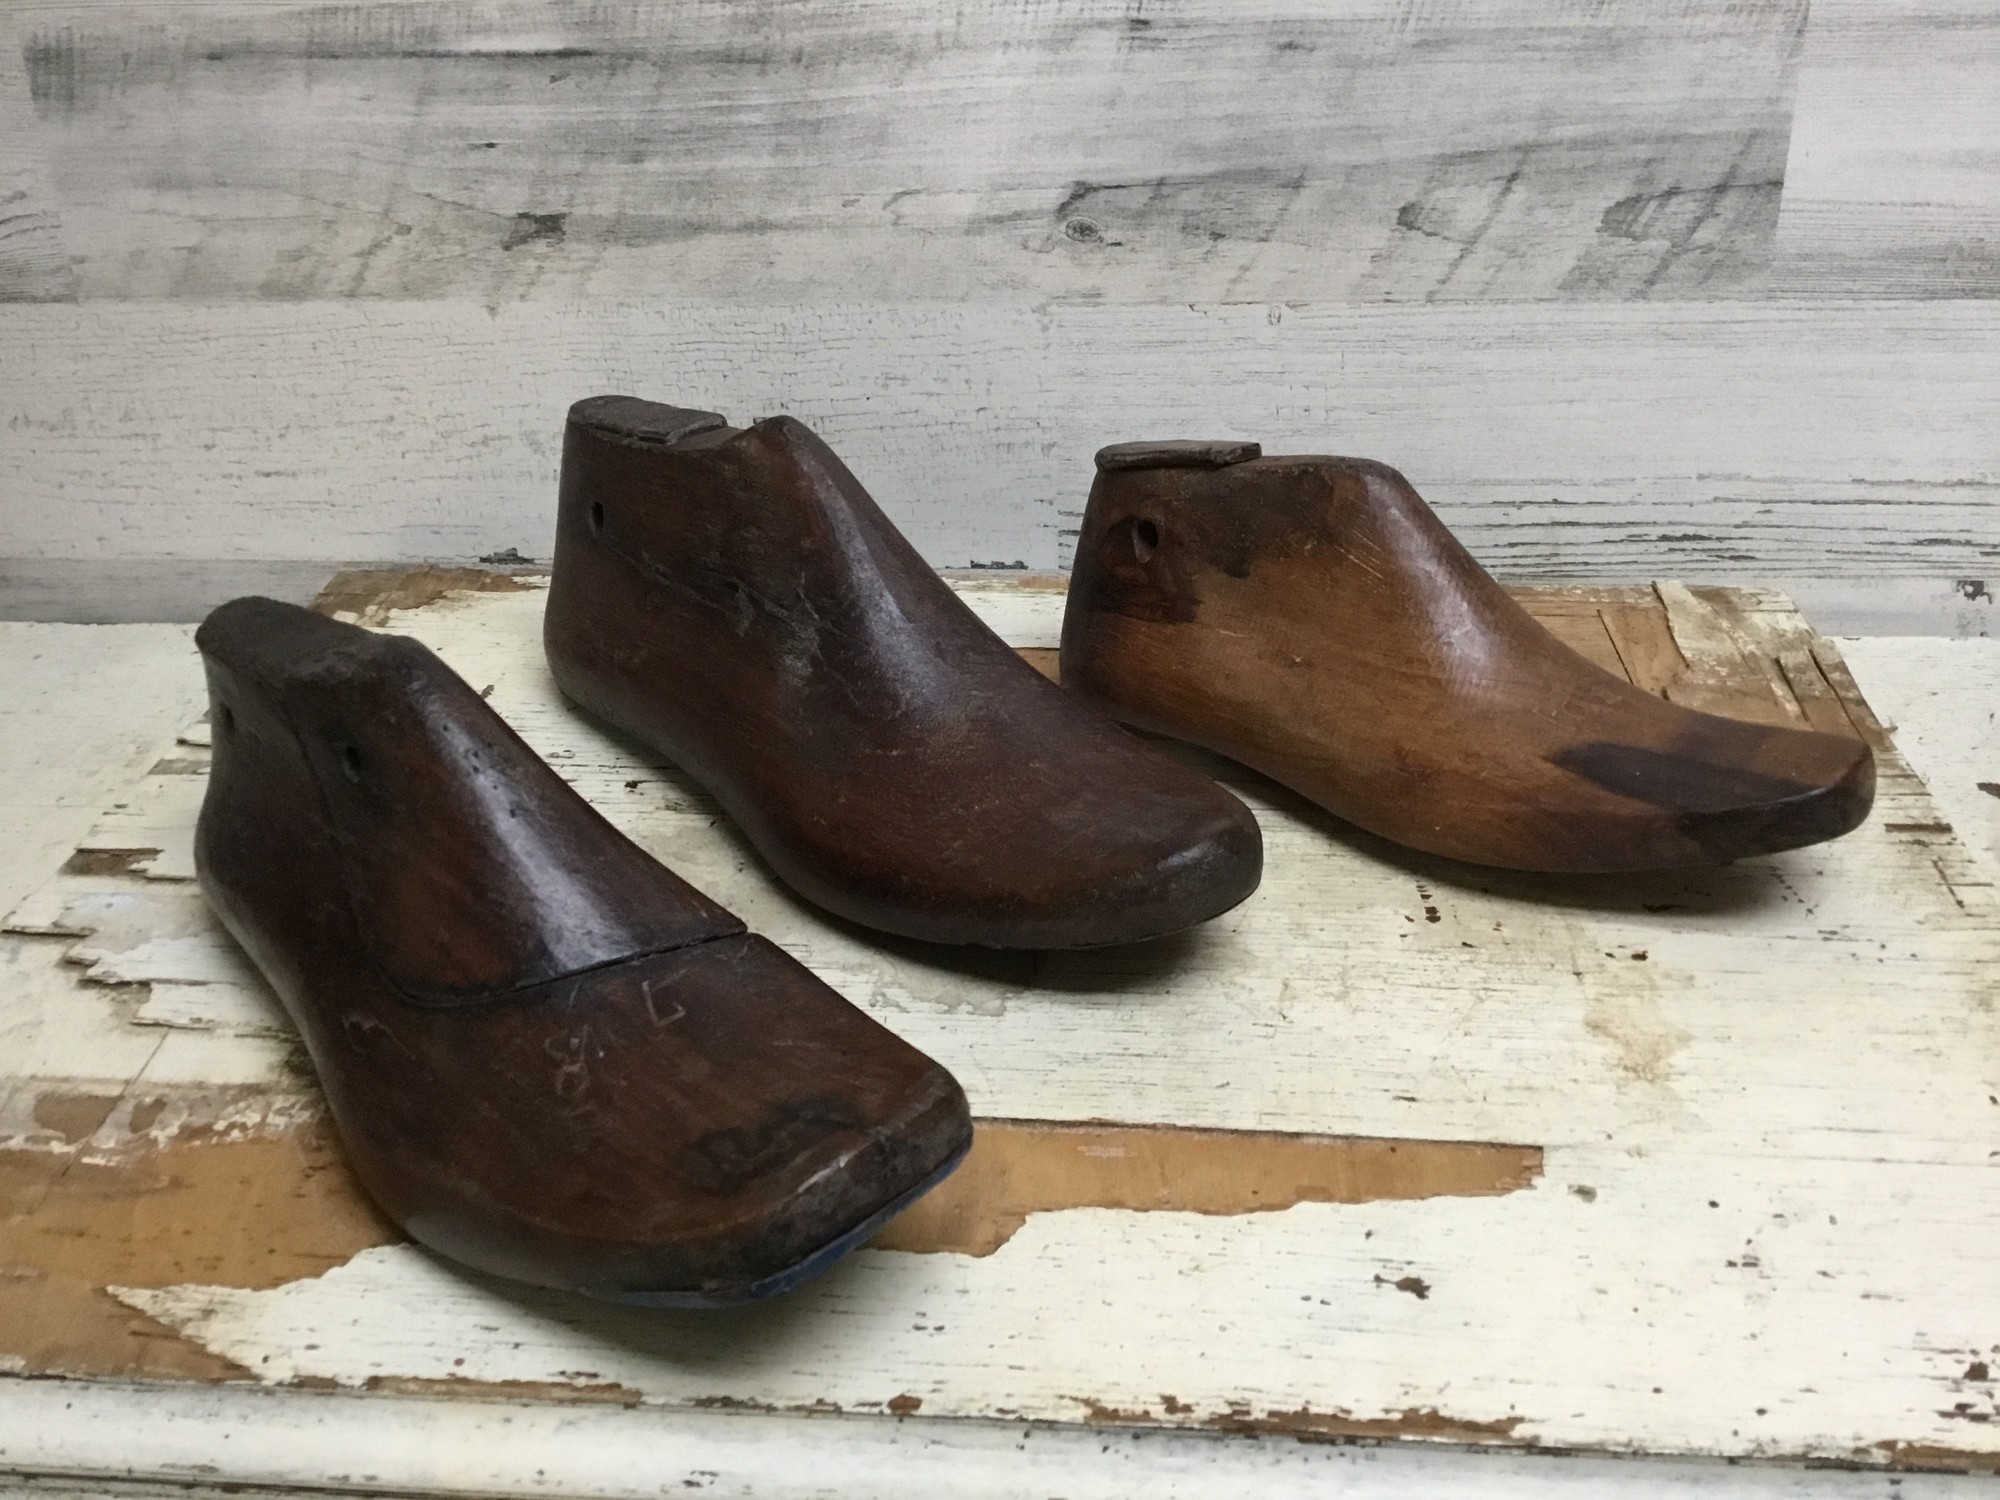 Vintage Wooden Shoe molds are great for fillers in a bowl or sitting on a set of books for decoration. Each Shoe will vary because they are authentic and will vary by size.